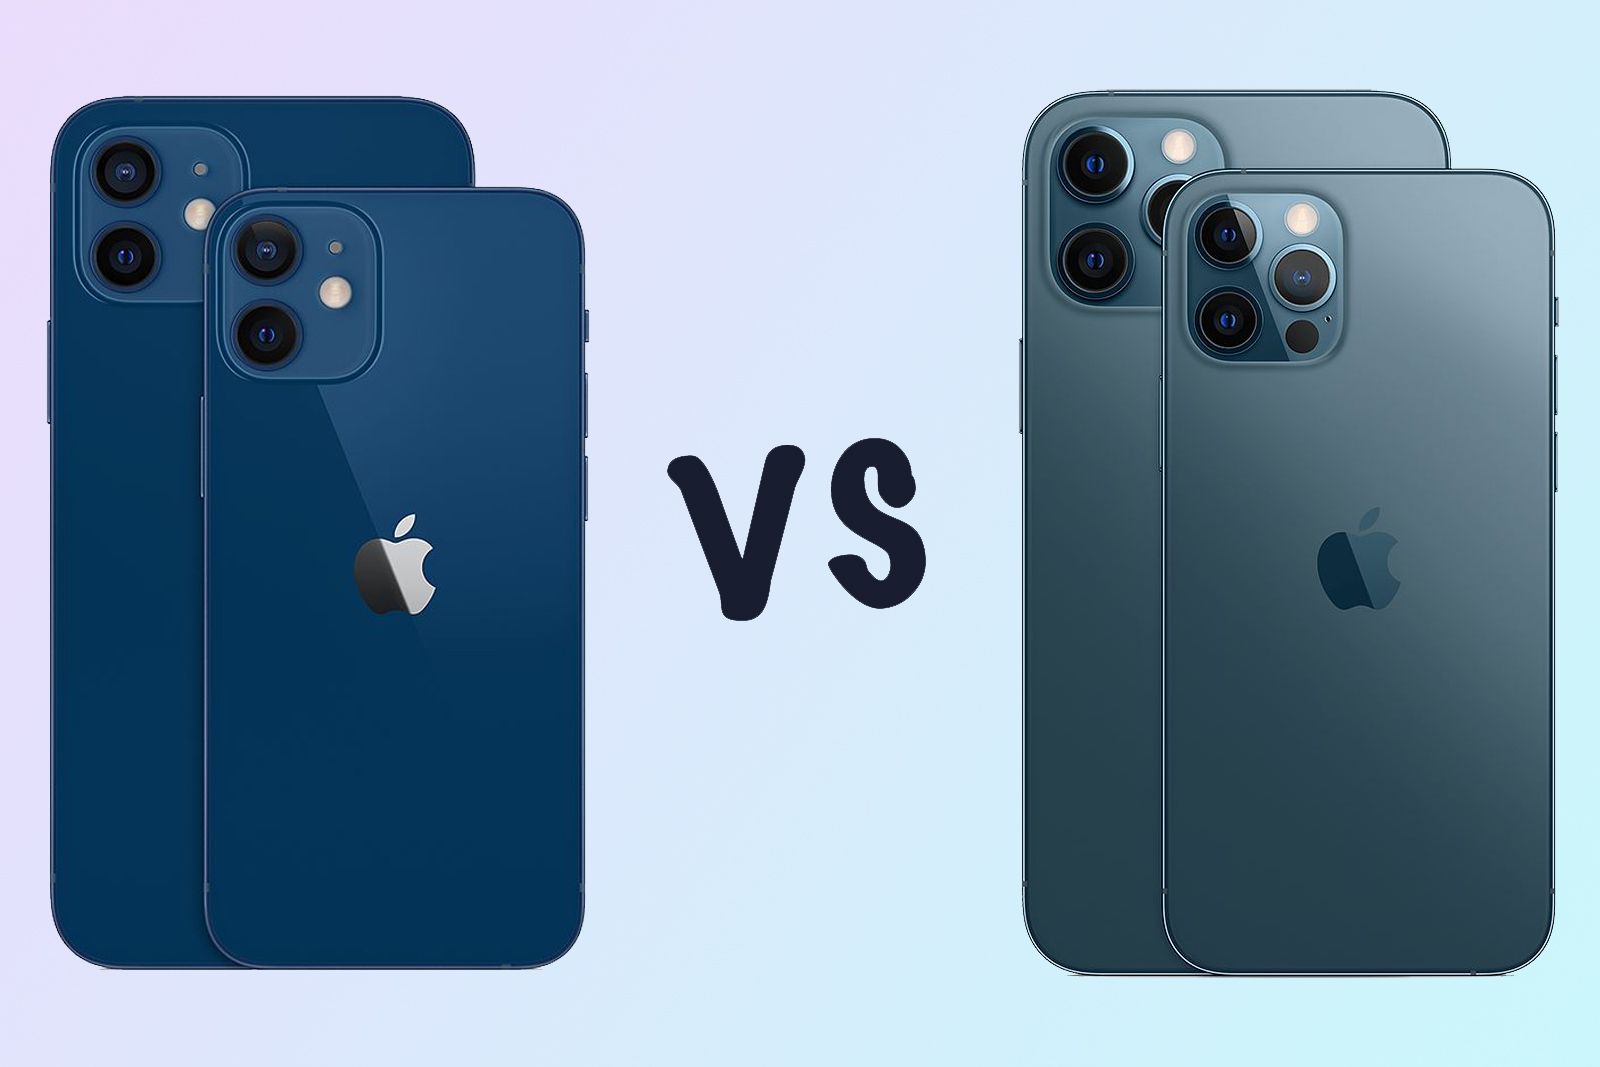 Apple iPhone 12 mini vs 12 vs 12 Pro: Which should you buy?